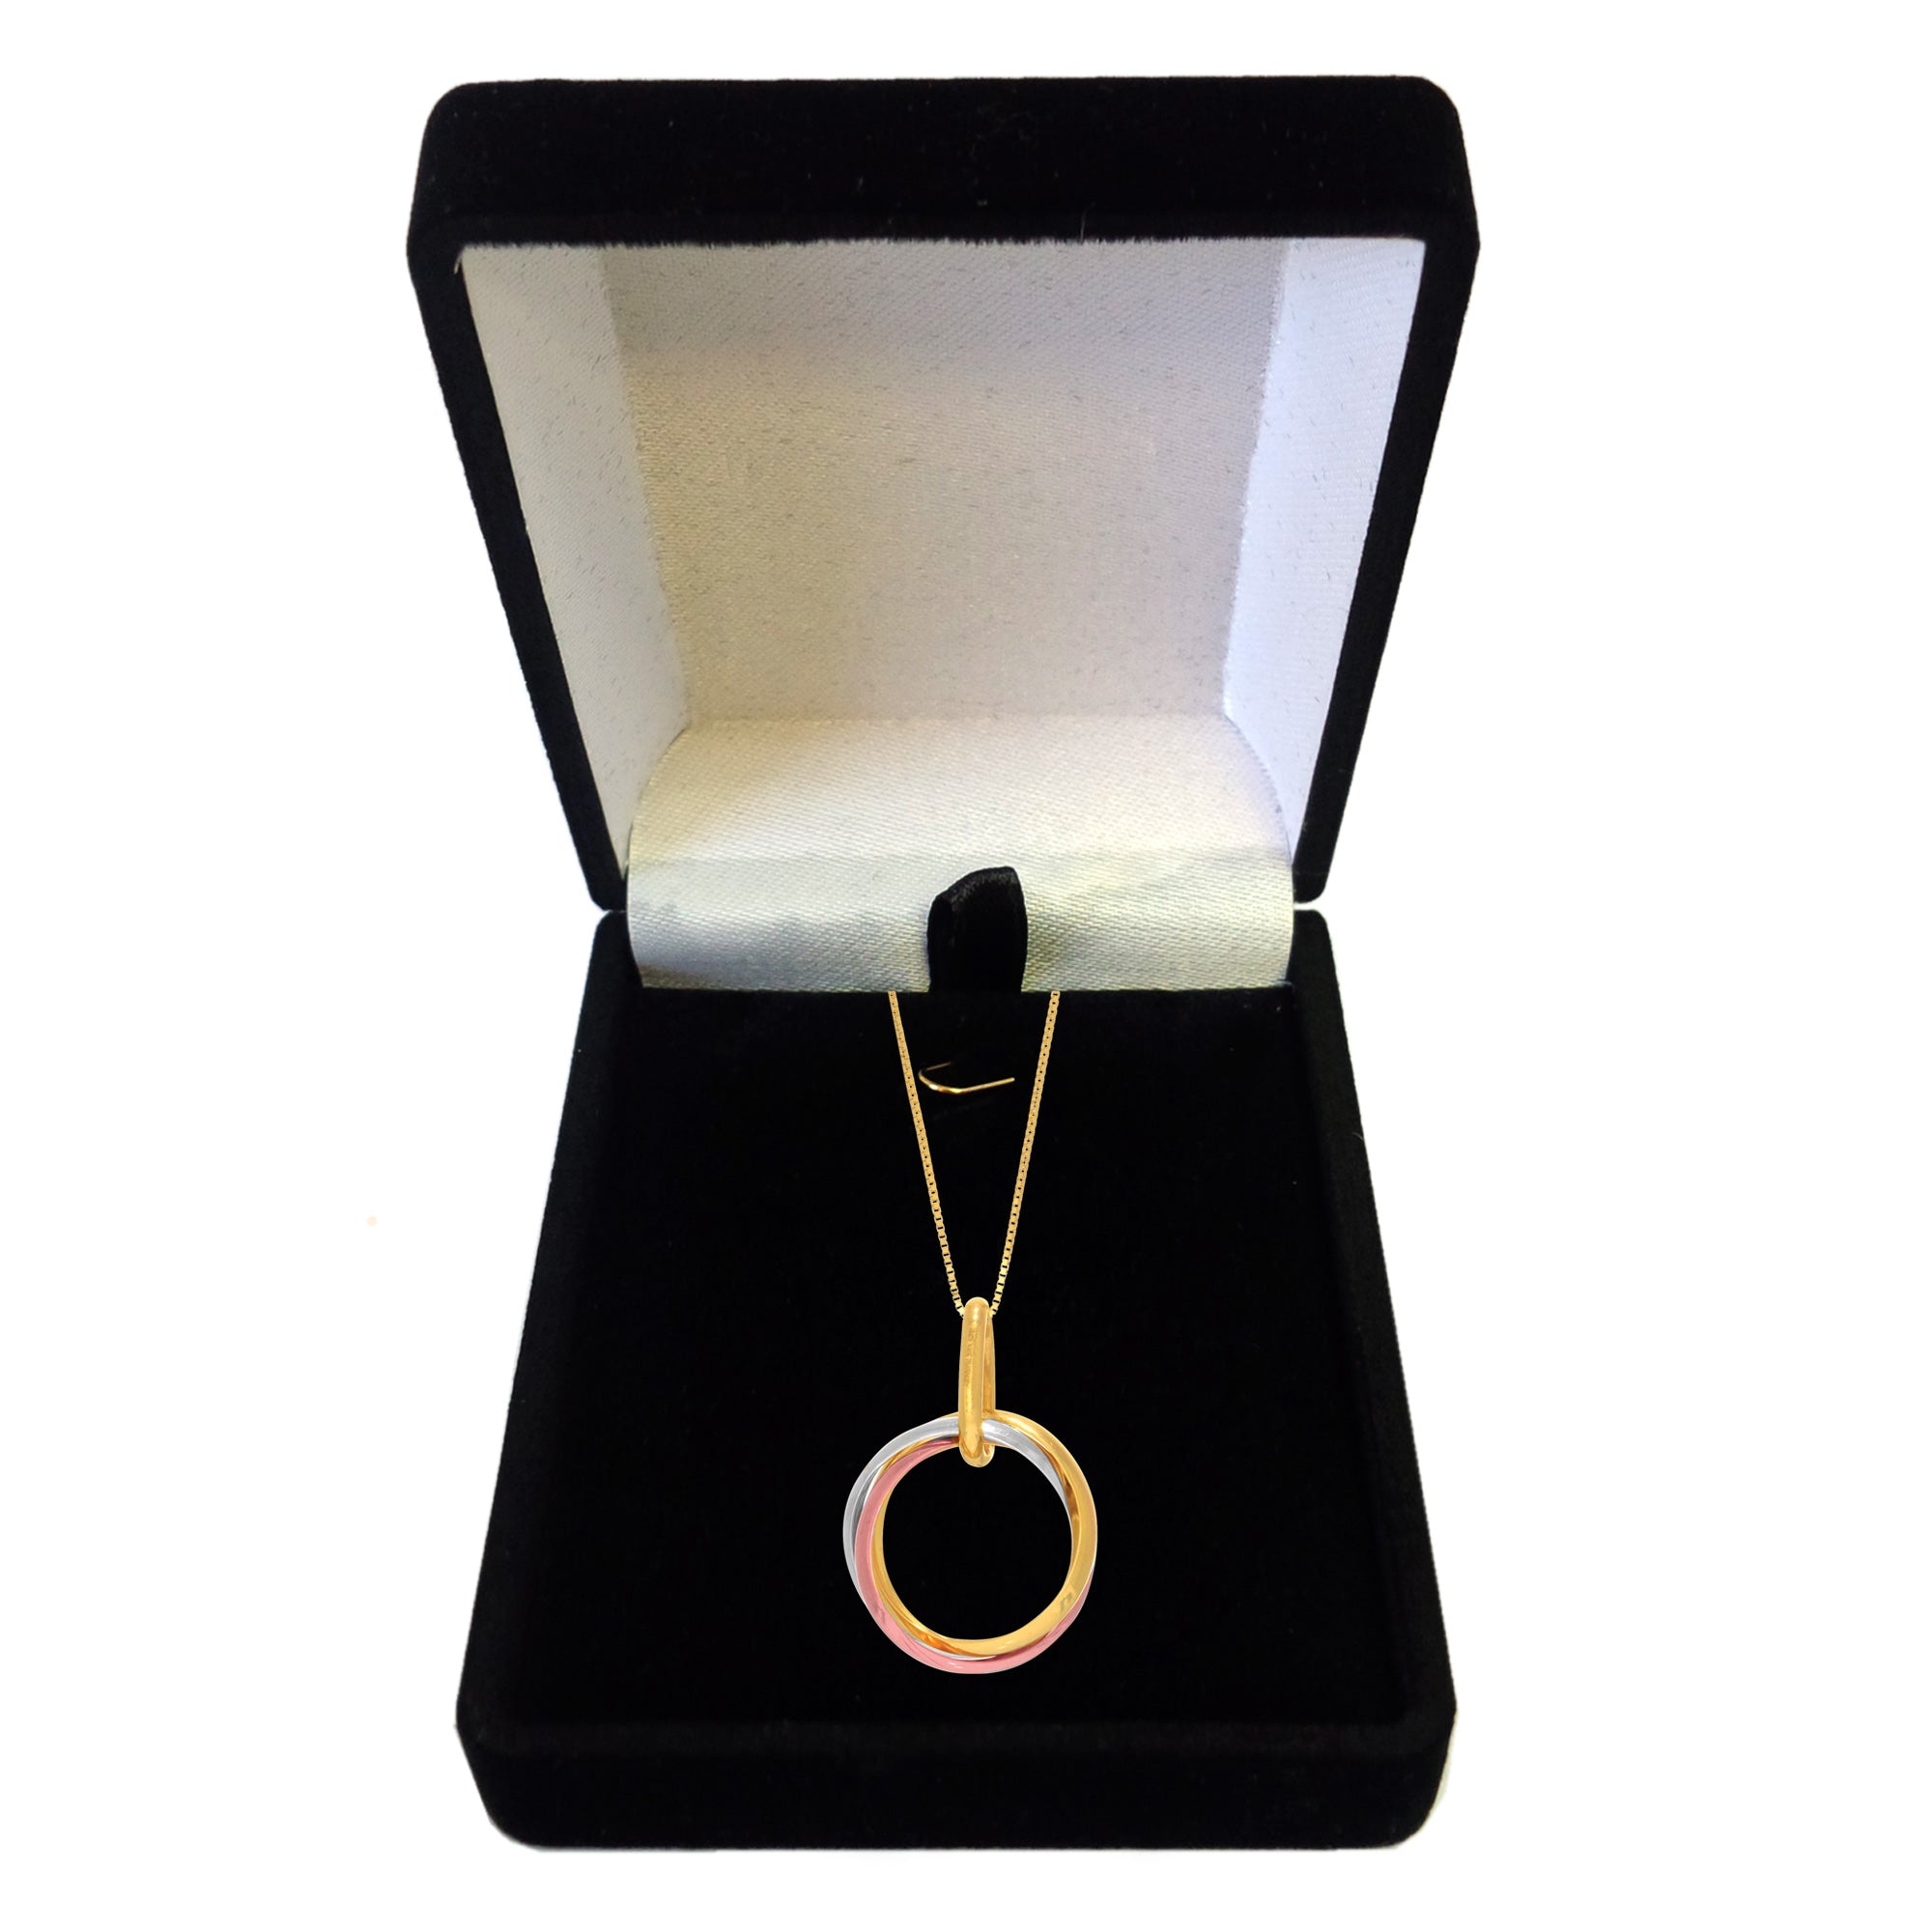 14k Tricolor Rose Gold Open Trinity Ring Pendant Necklace, 18" fine designer jewelry for men and women